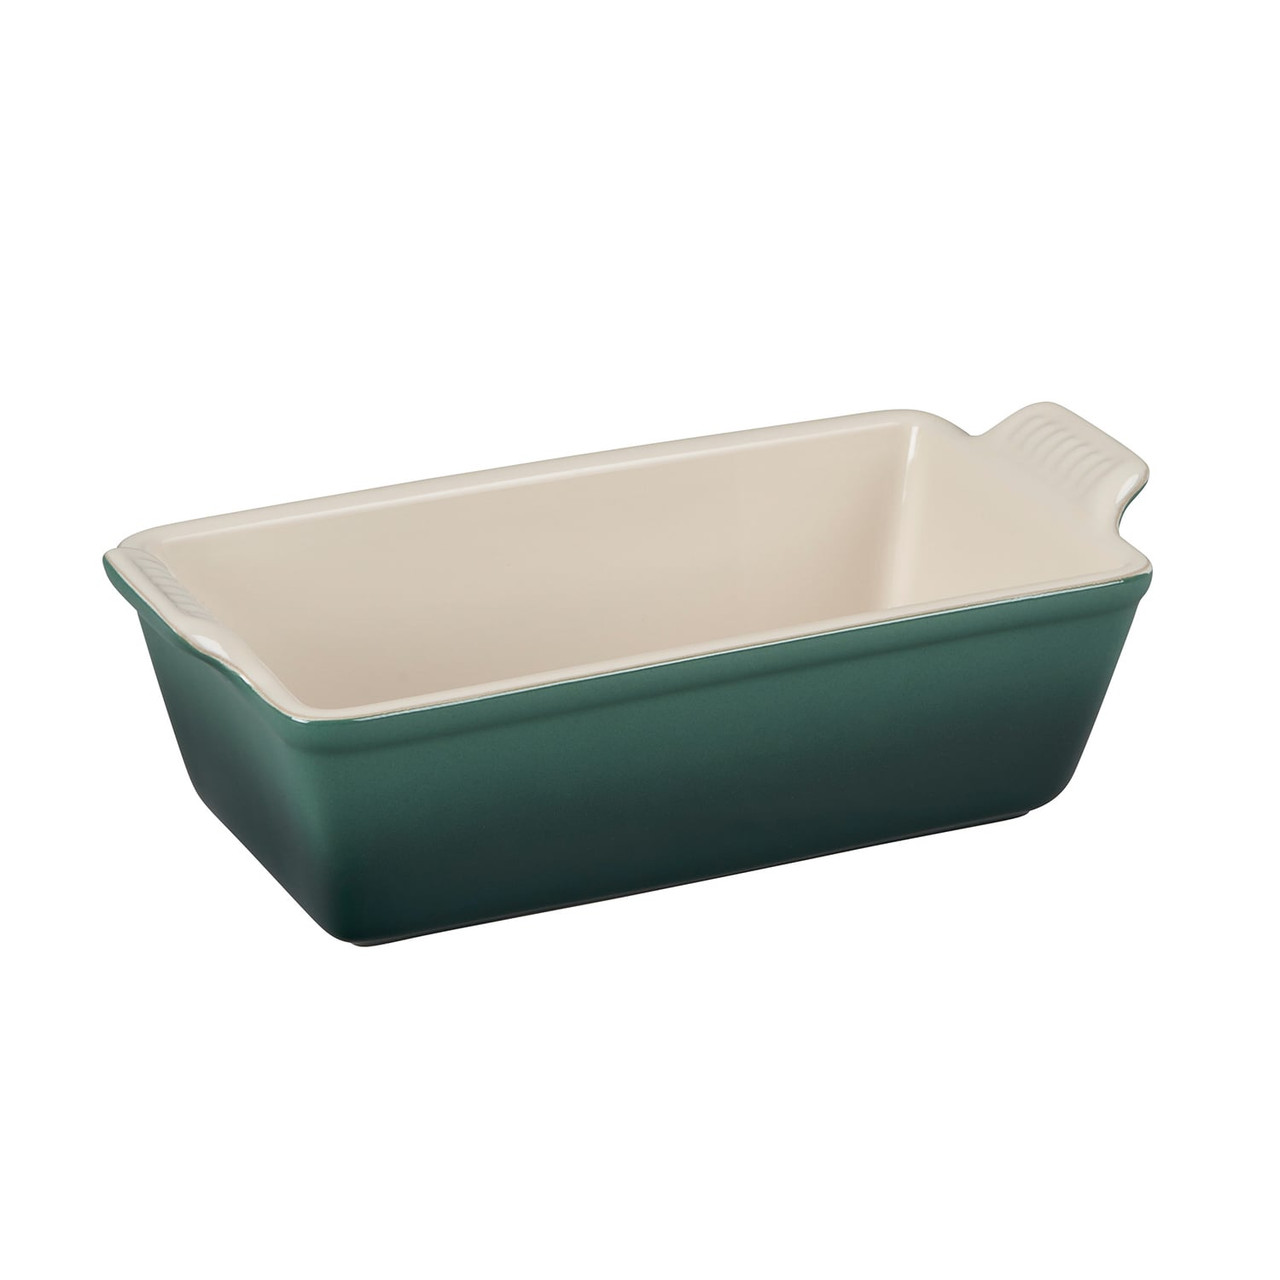 https://cdn11.bigcommerce.com/s-hccytny0od/images/stencil/1280x1280/products/3968/14493/le-creuset-heritage-loaf-pan-artichaut__31167.1617186133.jpg?c=2?imbypass=on